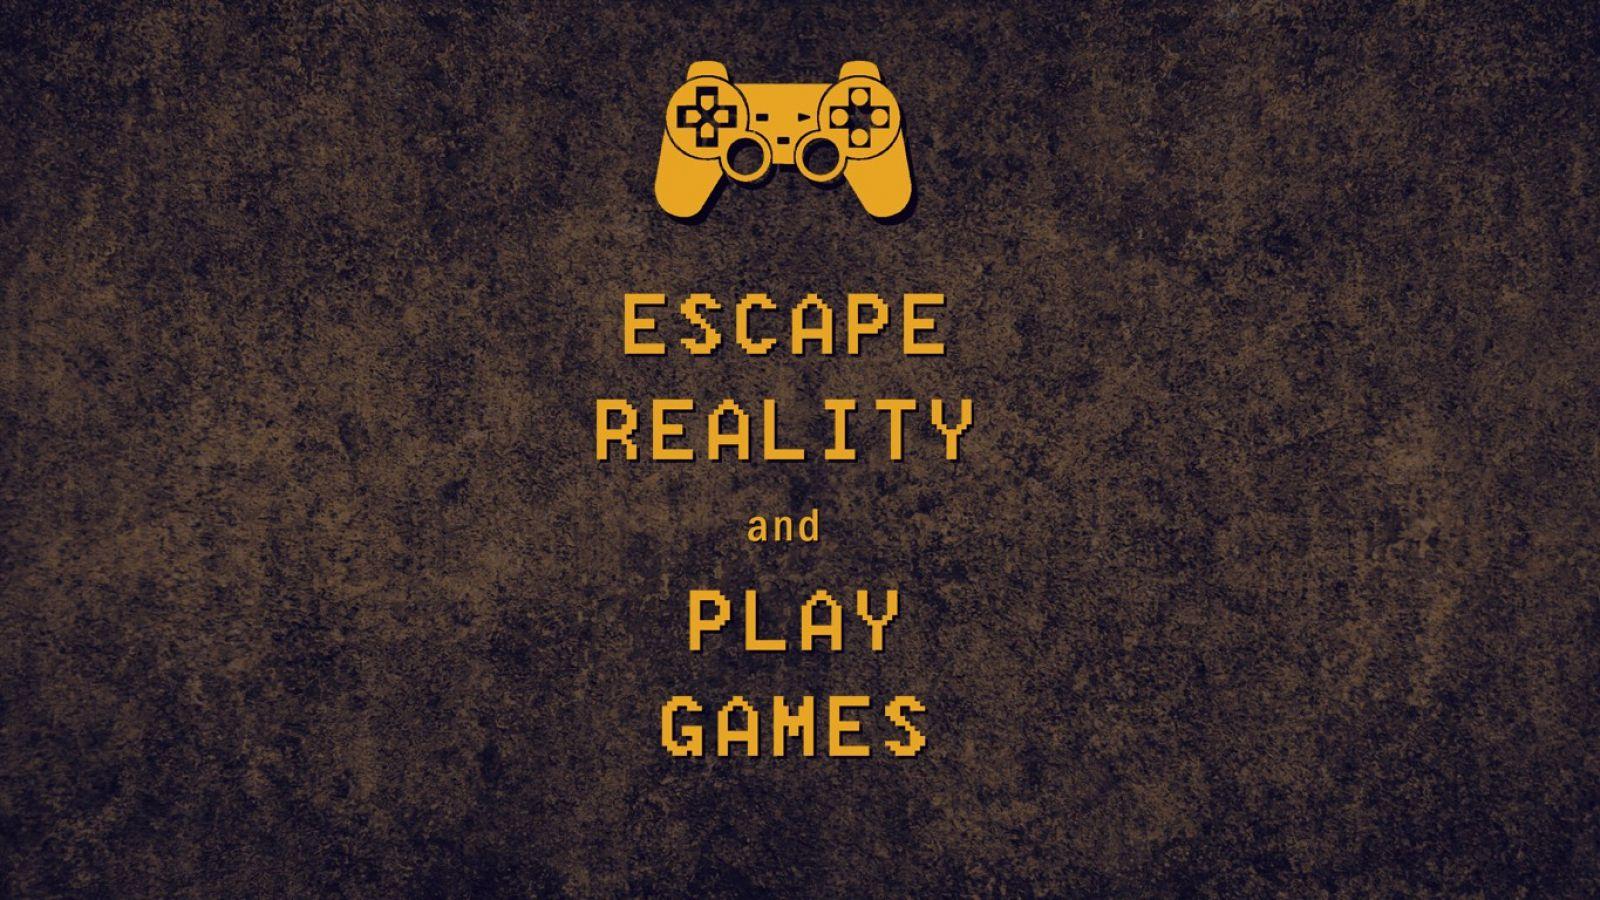 Gaming Quotes Wallpapers - Wallpaper Cave